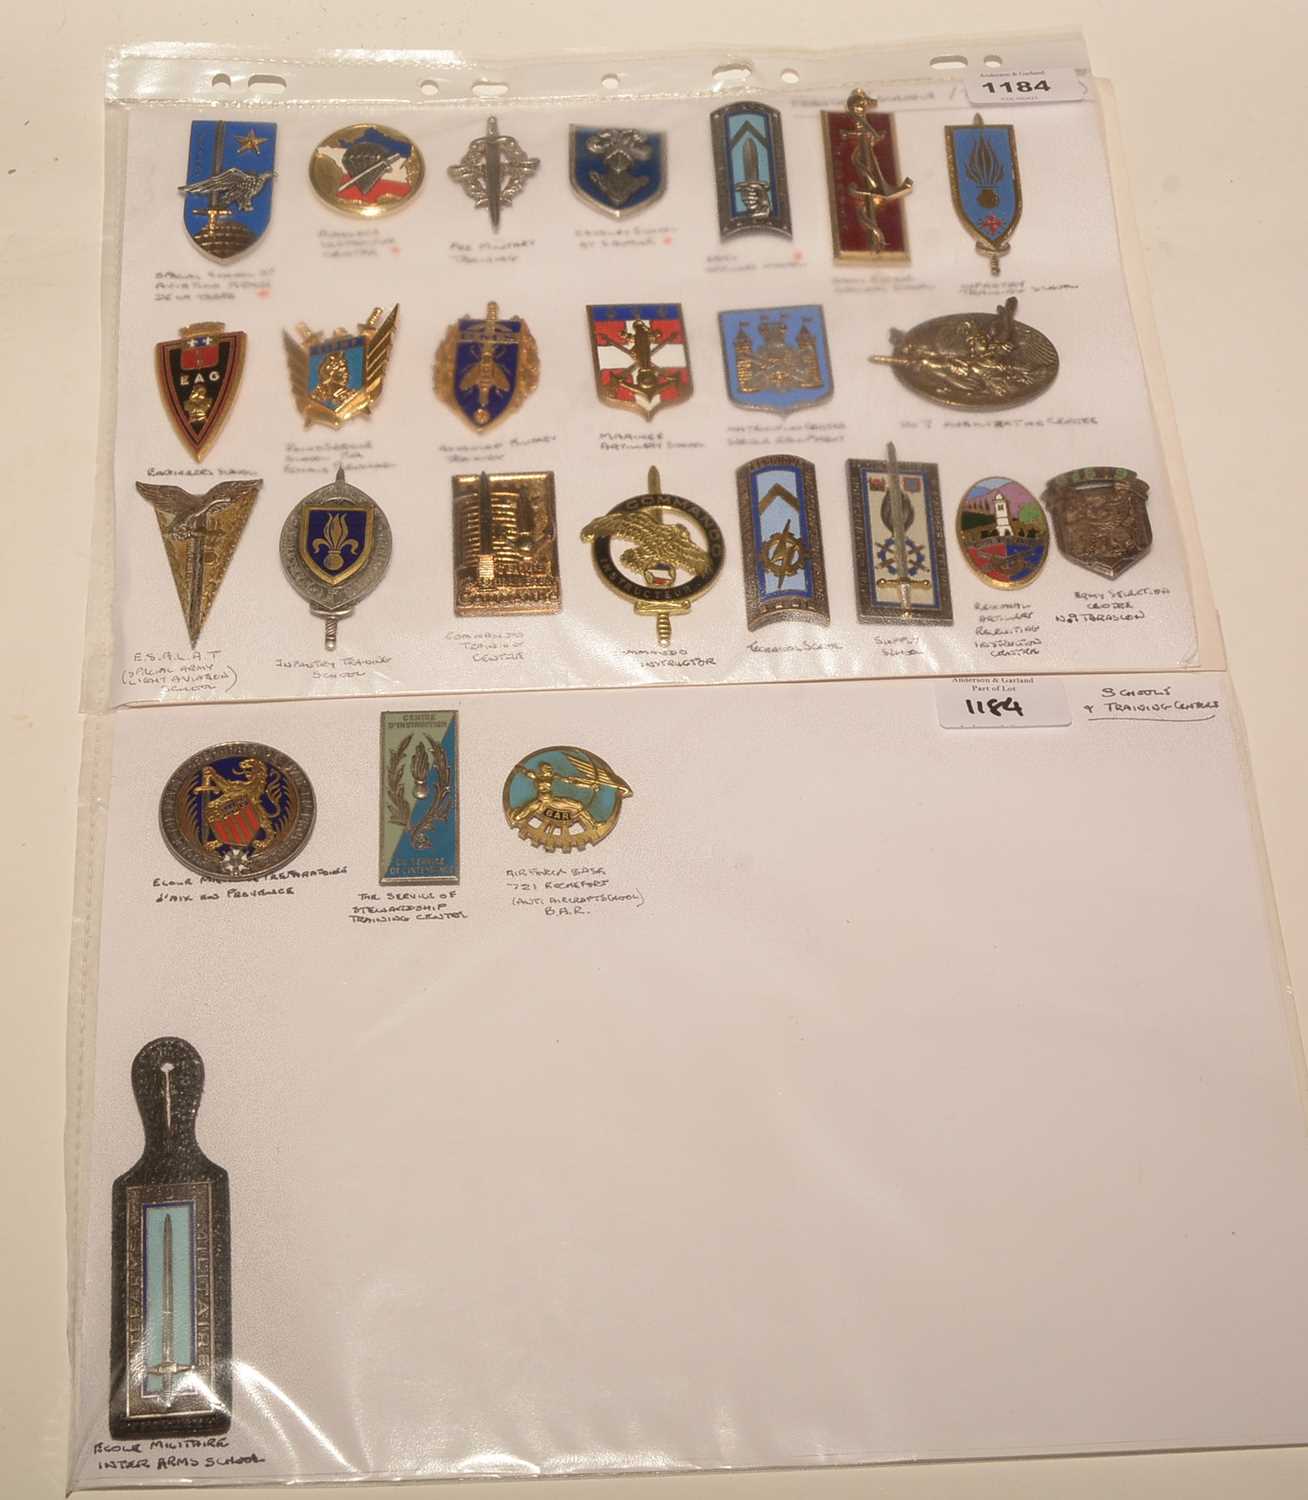 Lot 1184 - A collection of 25 French enamel School and Training Centre pocket crests.